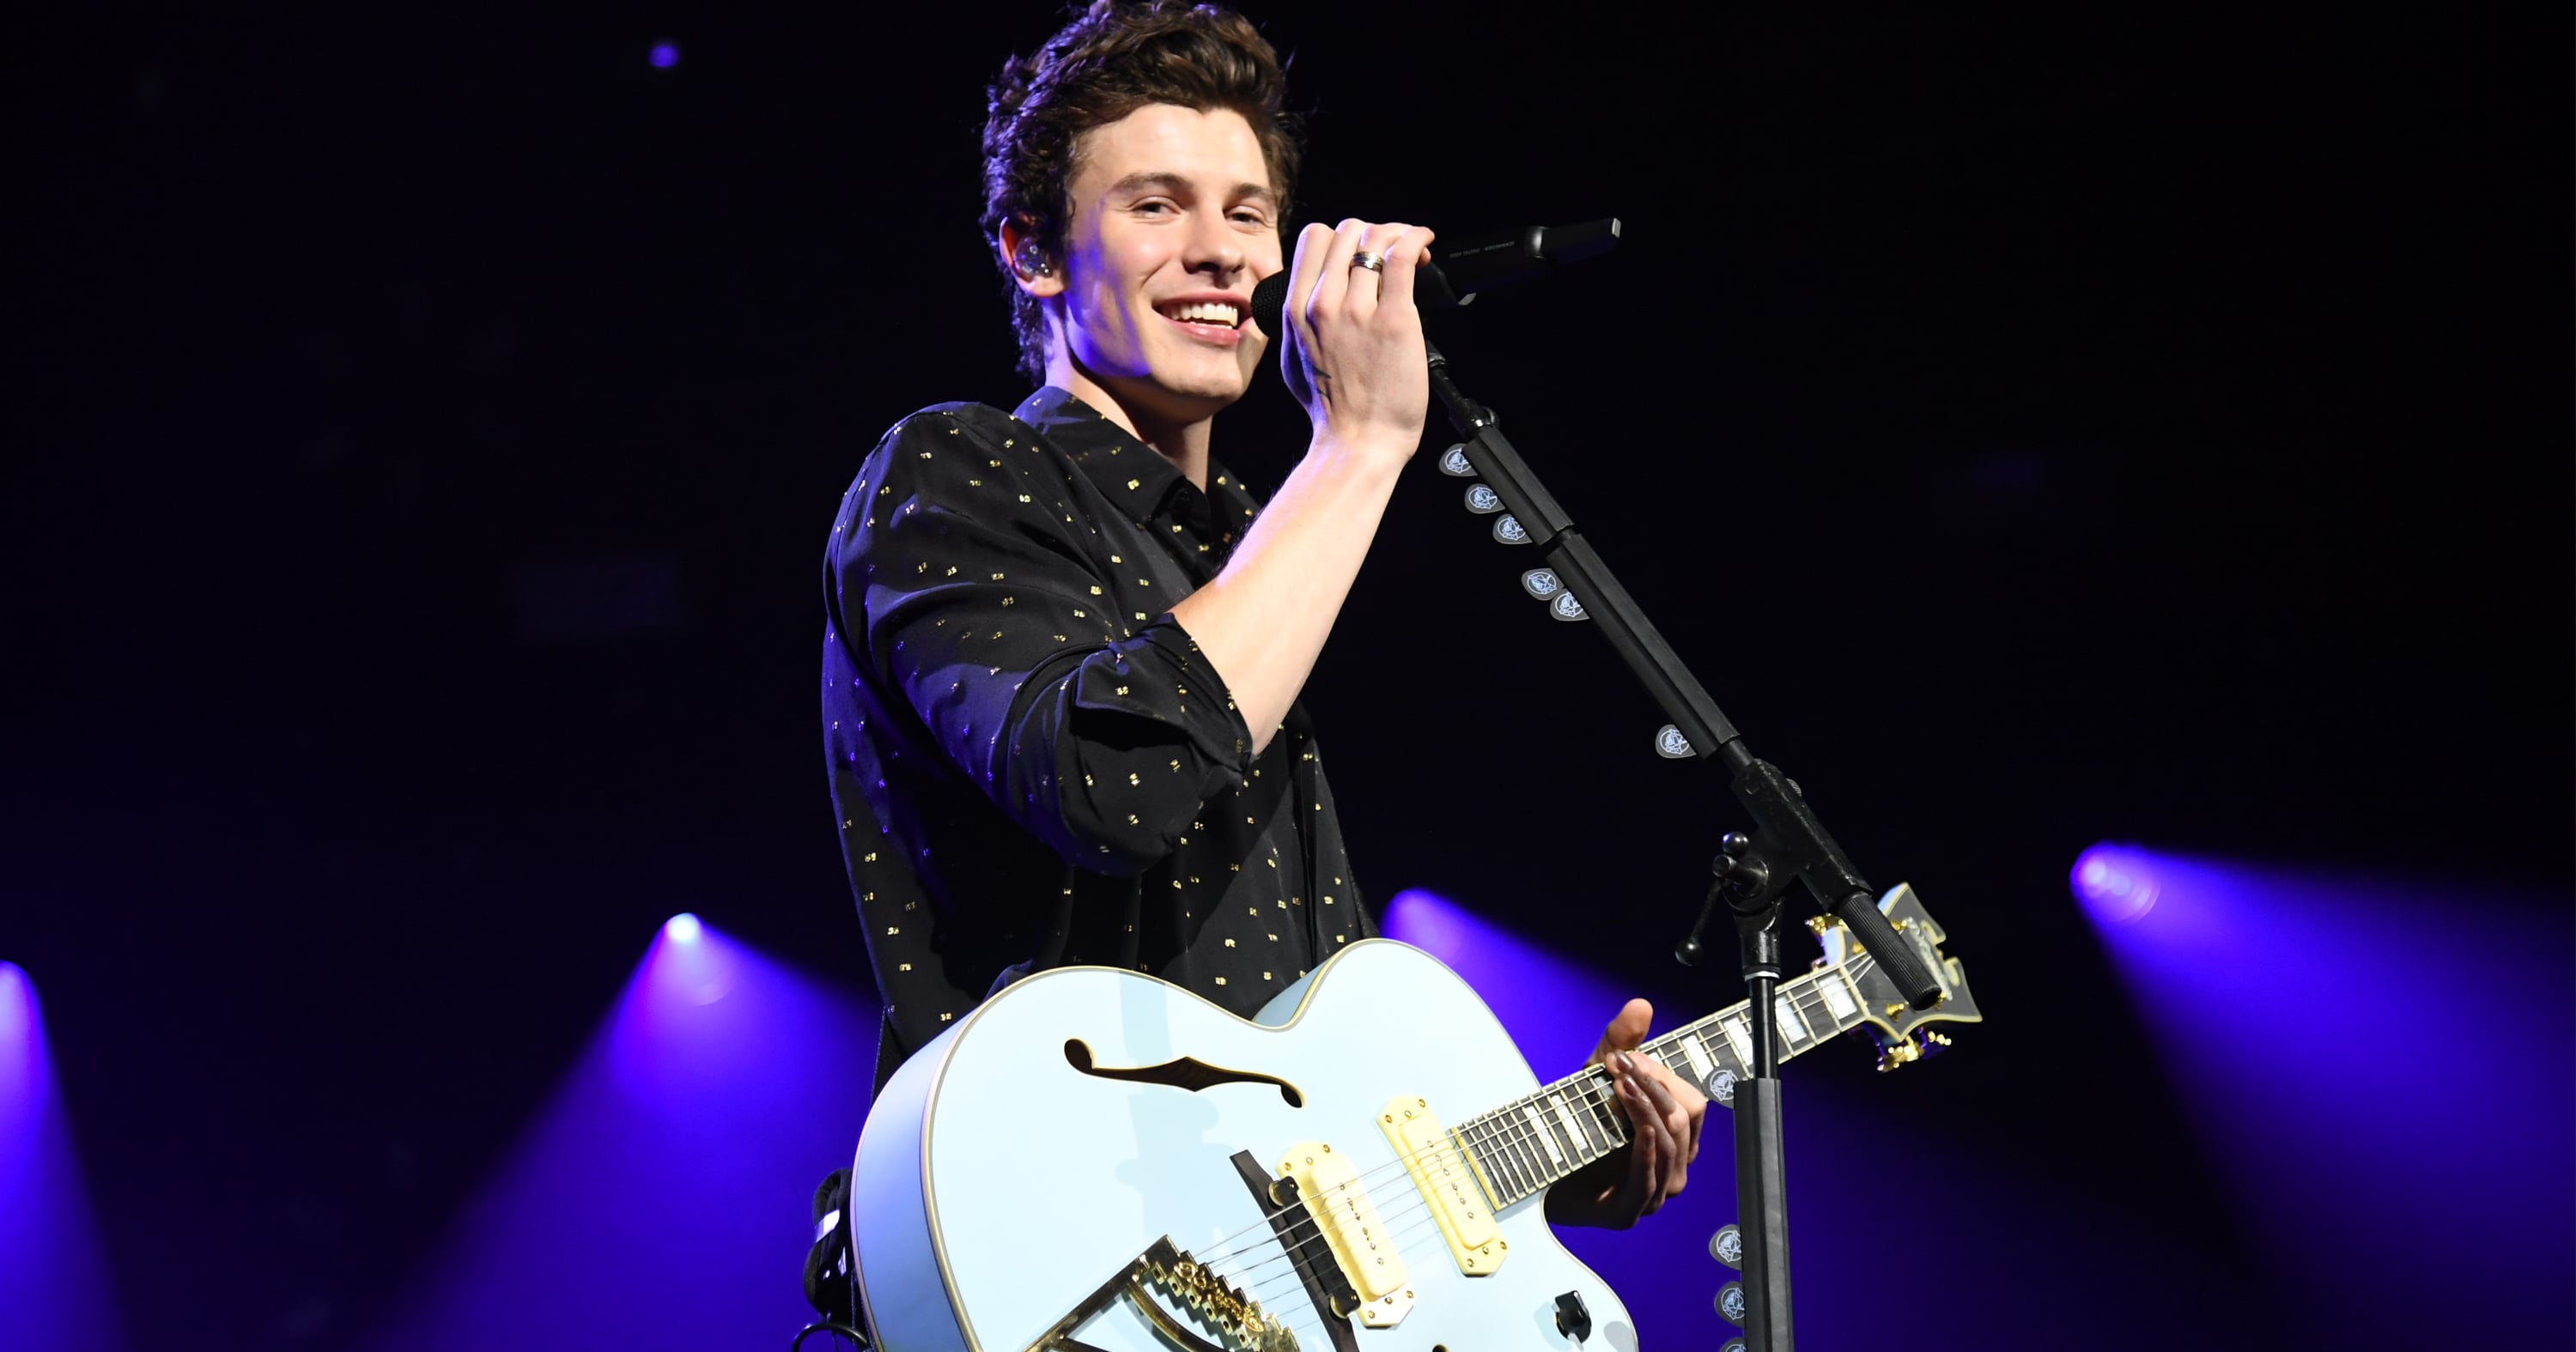 Who Has Shawn Mendes Dated?